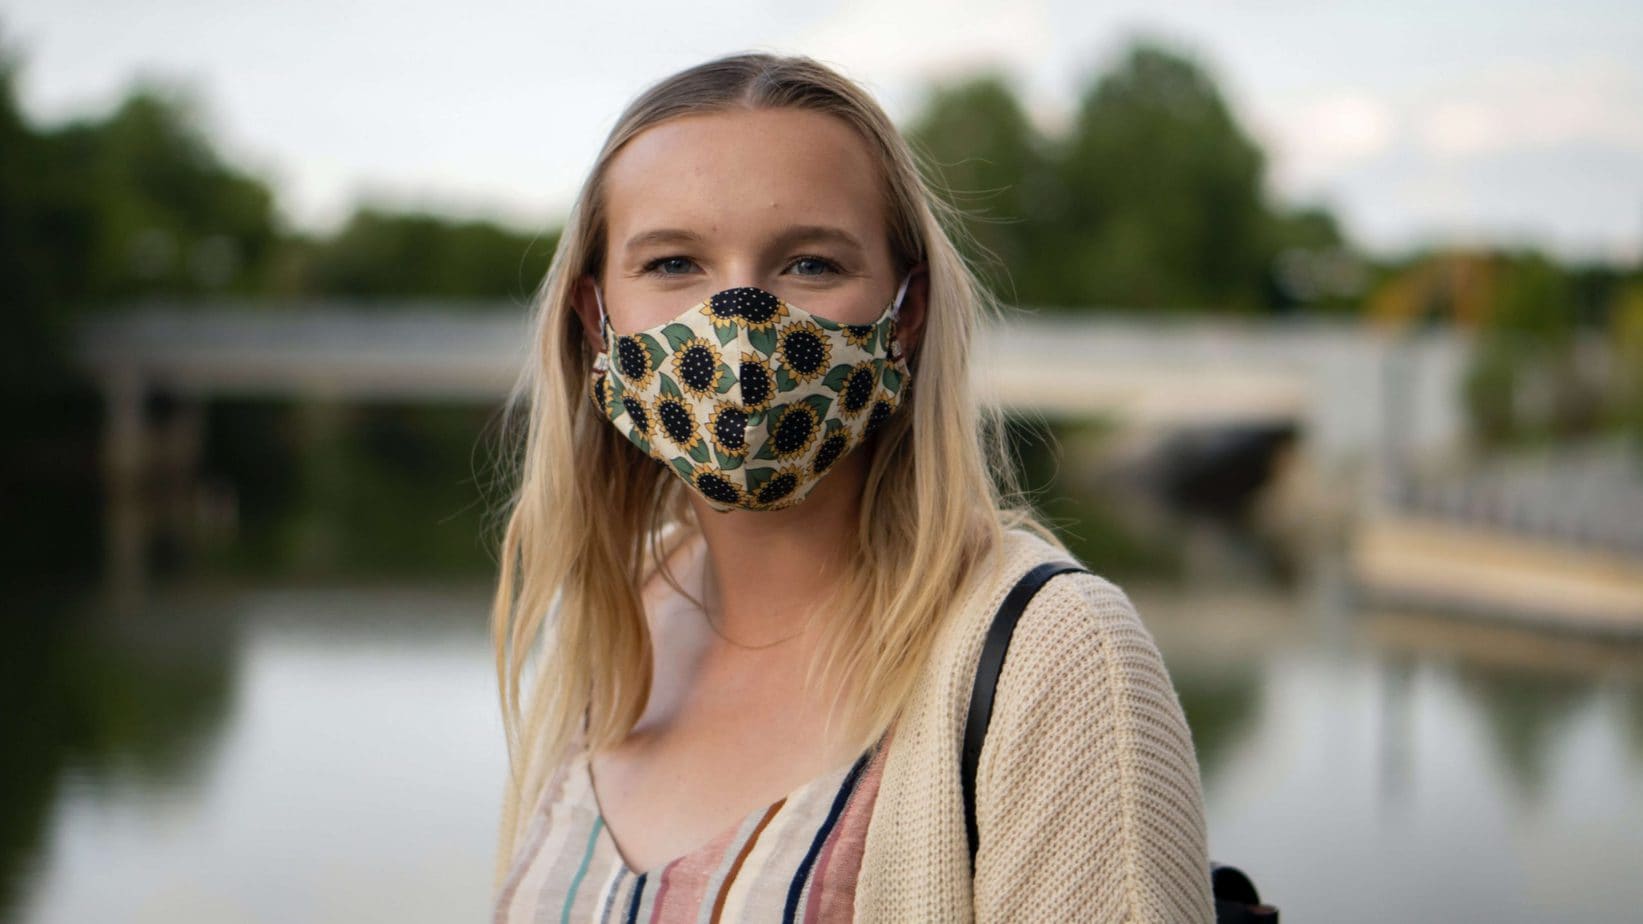 A protective mask as an advertising gadget. Does it work?